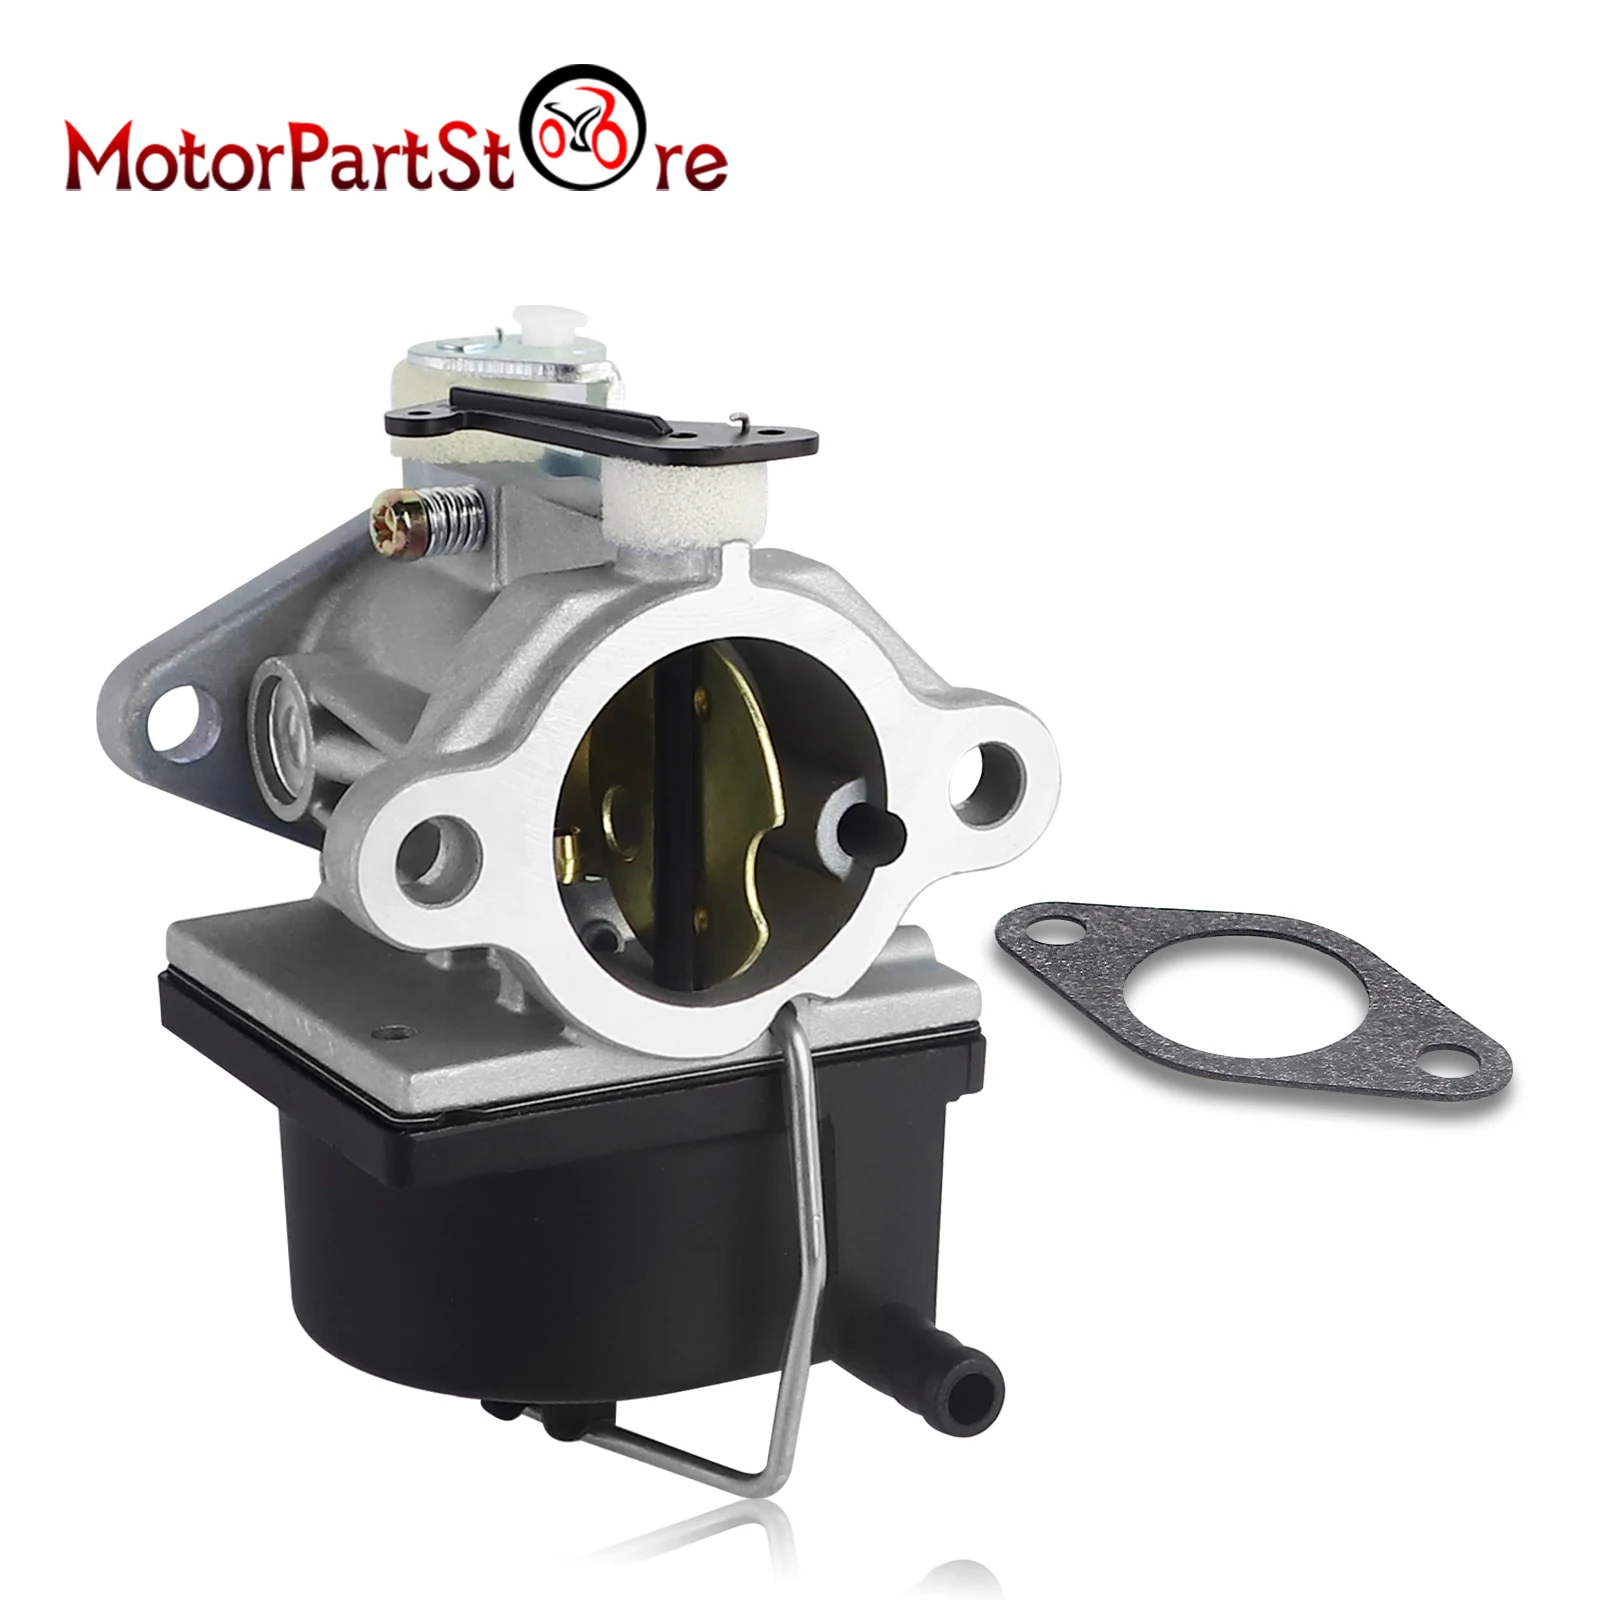 

Carb Carburetor 640065 640065A For Tecumseh 13HP 13.5HP 14HP 15HP Tractor OHV110 OHV115 OHV120 OHV135 Lawn Mower MTD Yard Engine